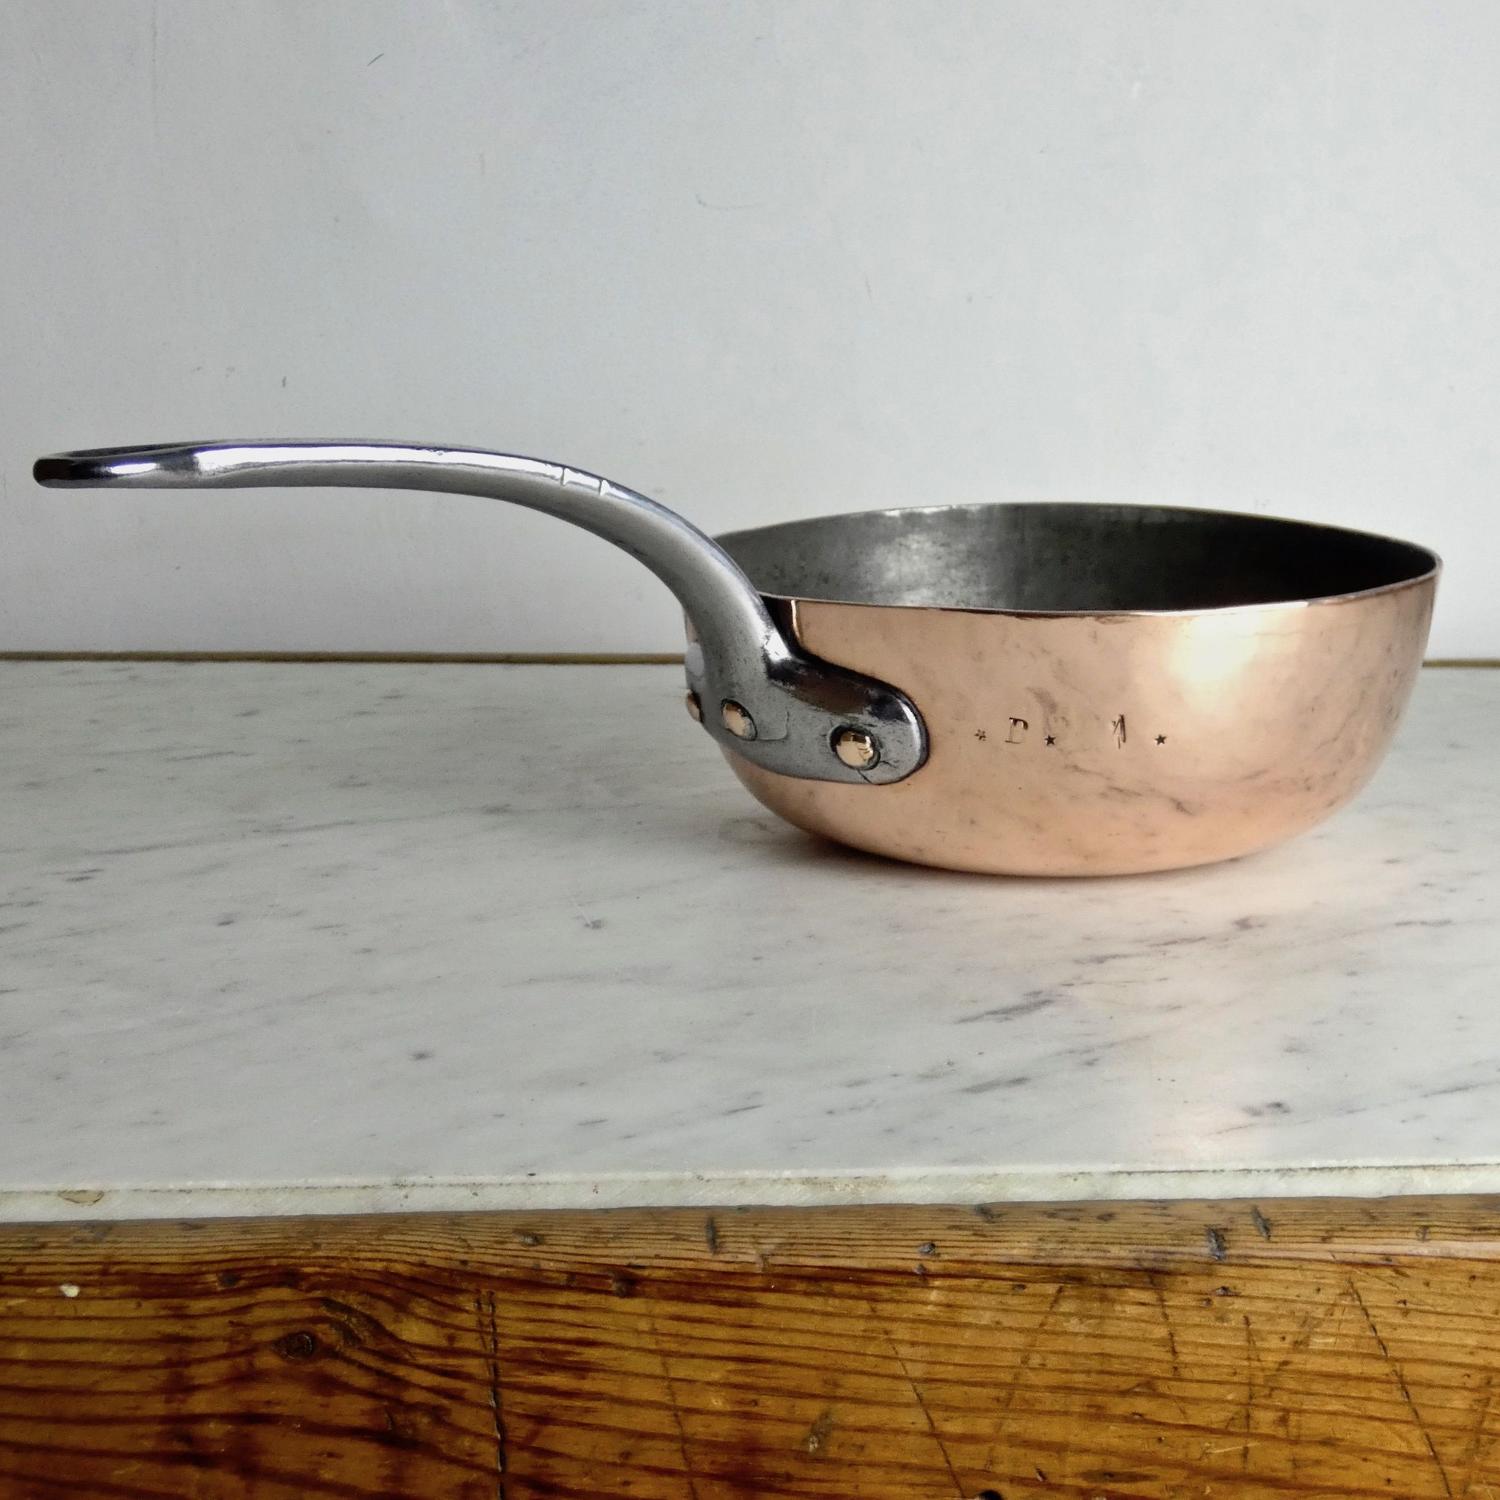 Heavy French copper pan